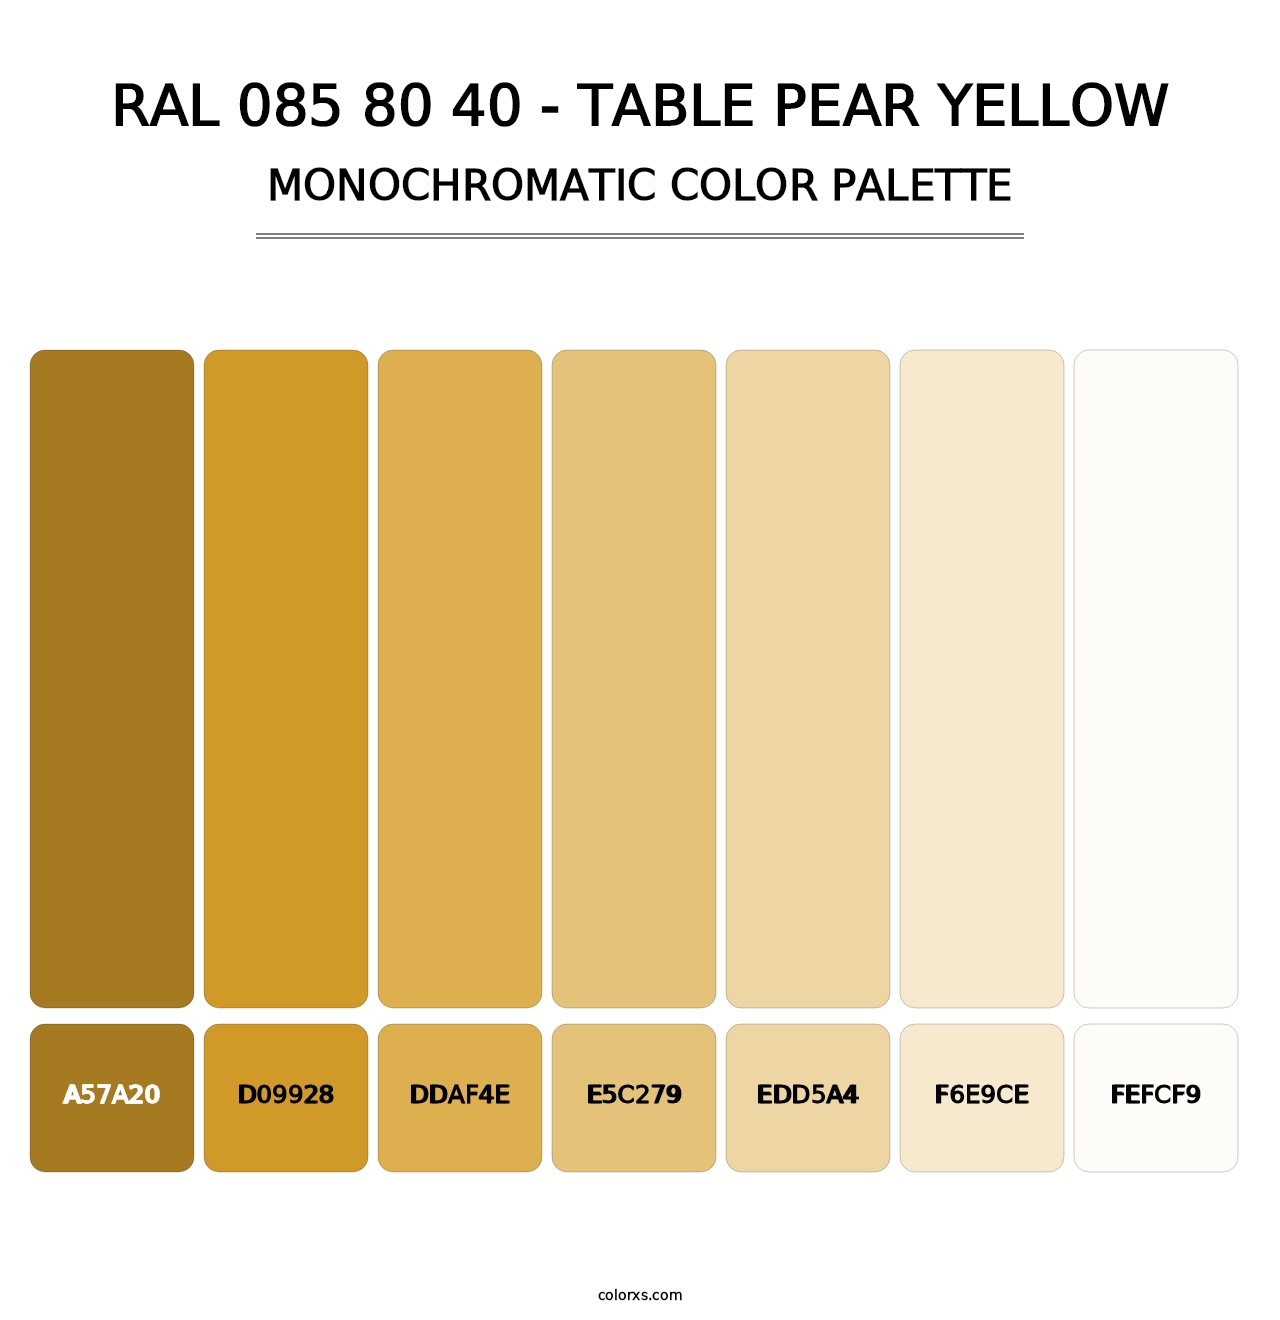 RAL 085 80 40 - Table Pear Yellow - Monochromatic Color Palette